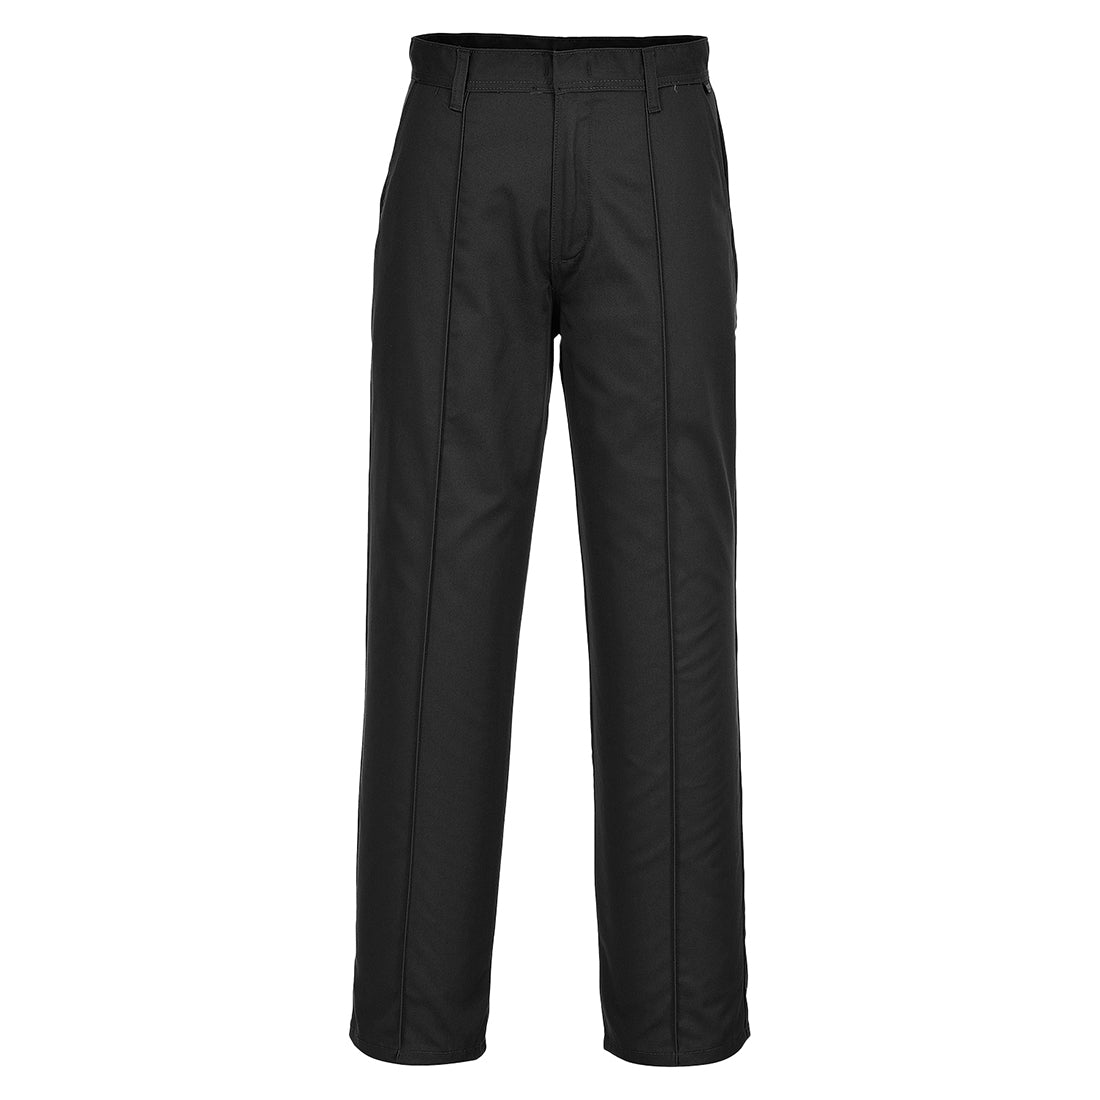 Portwest 2885 - Black Preston Mens Work Trousers with Side Pockets sz 32" Tall